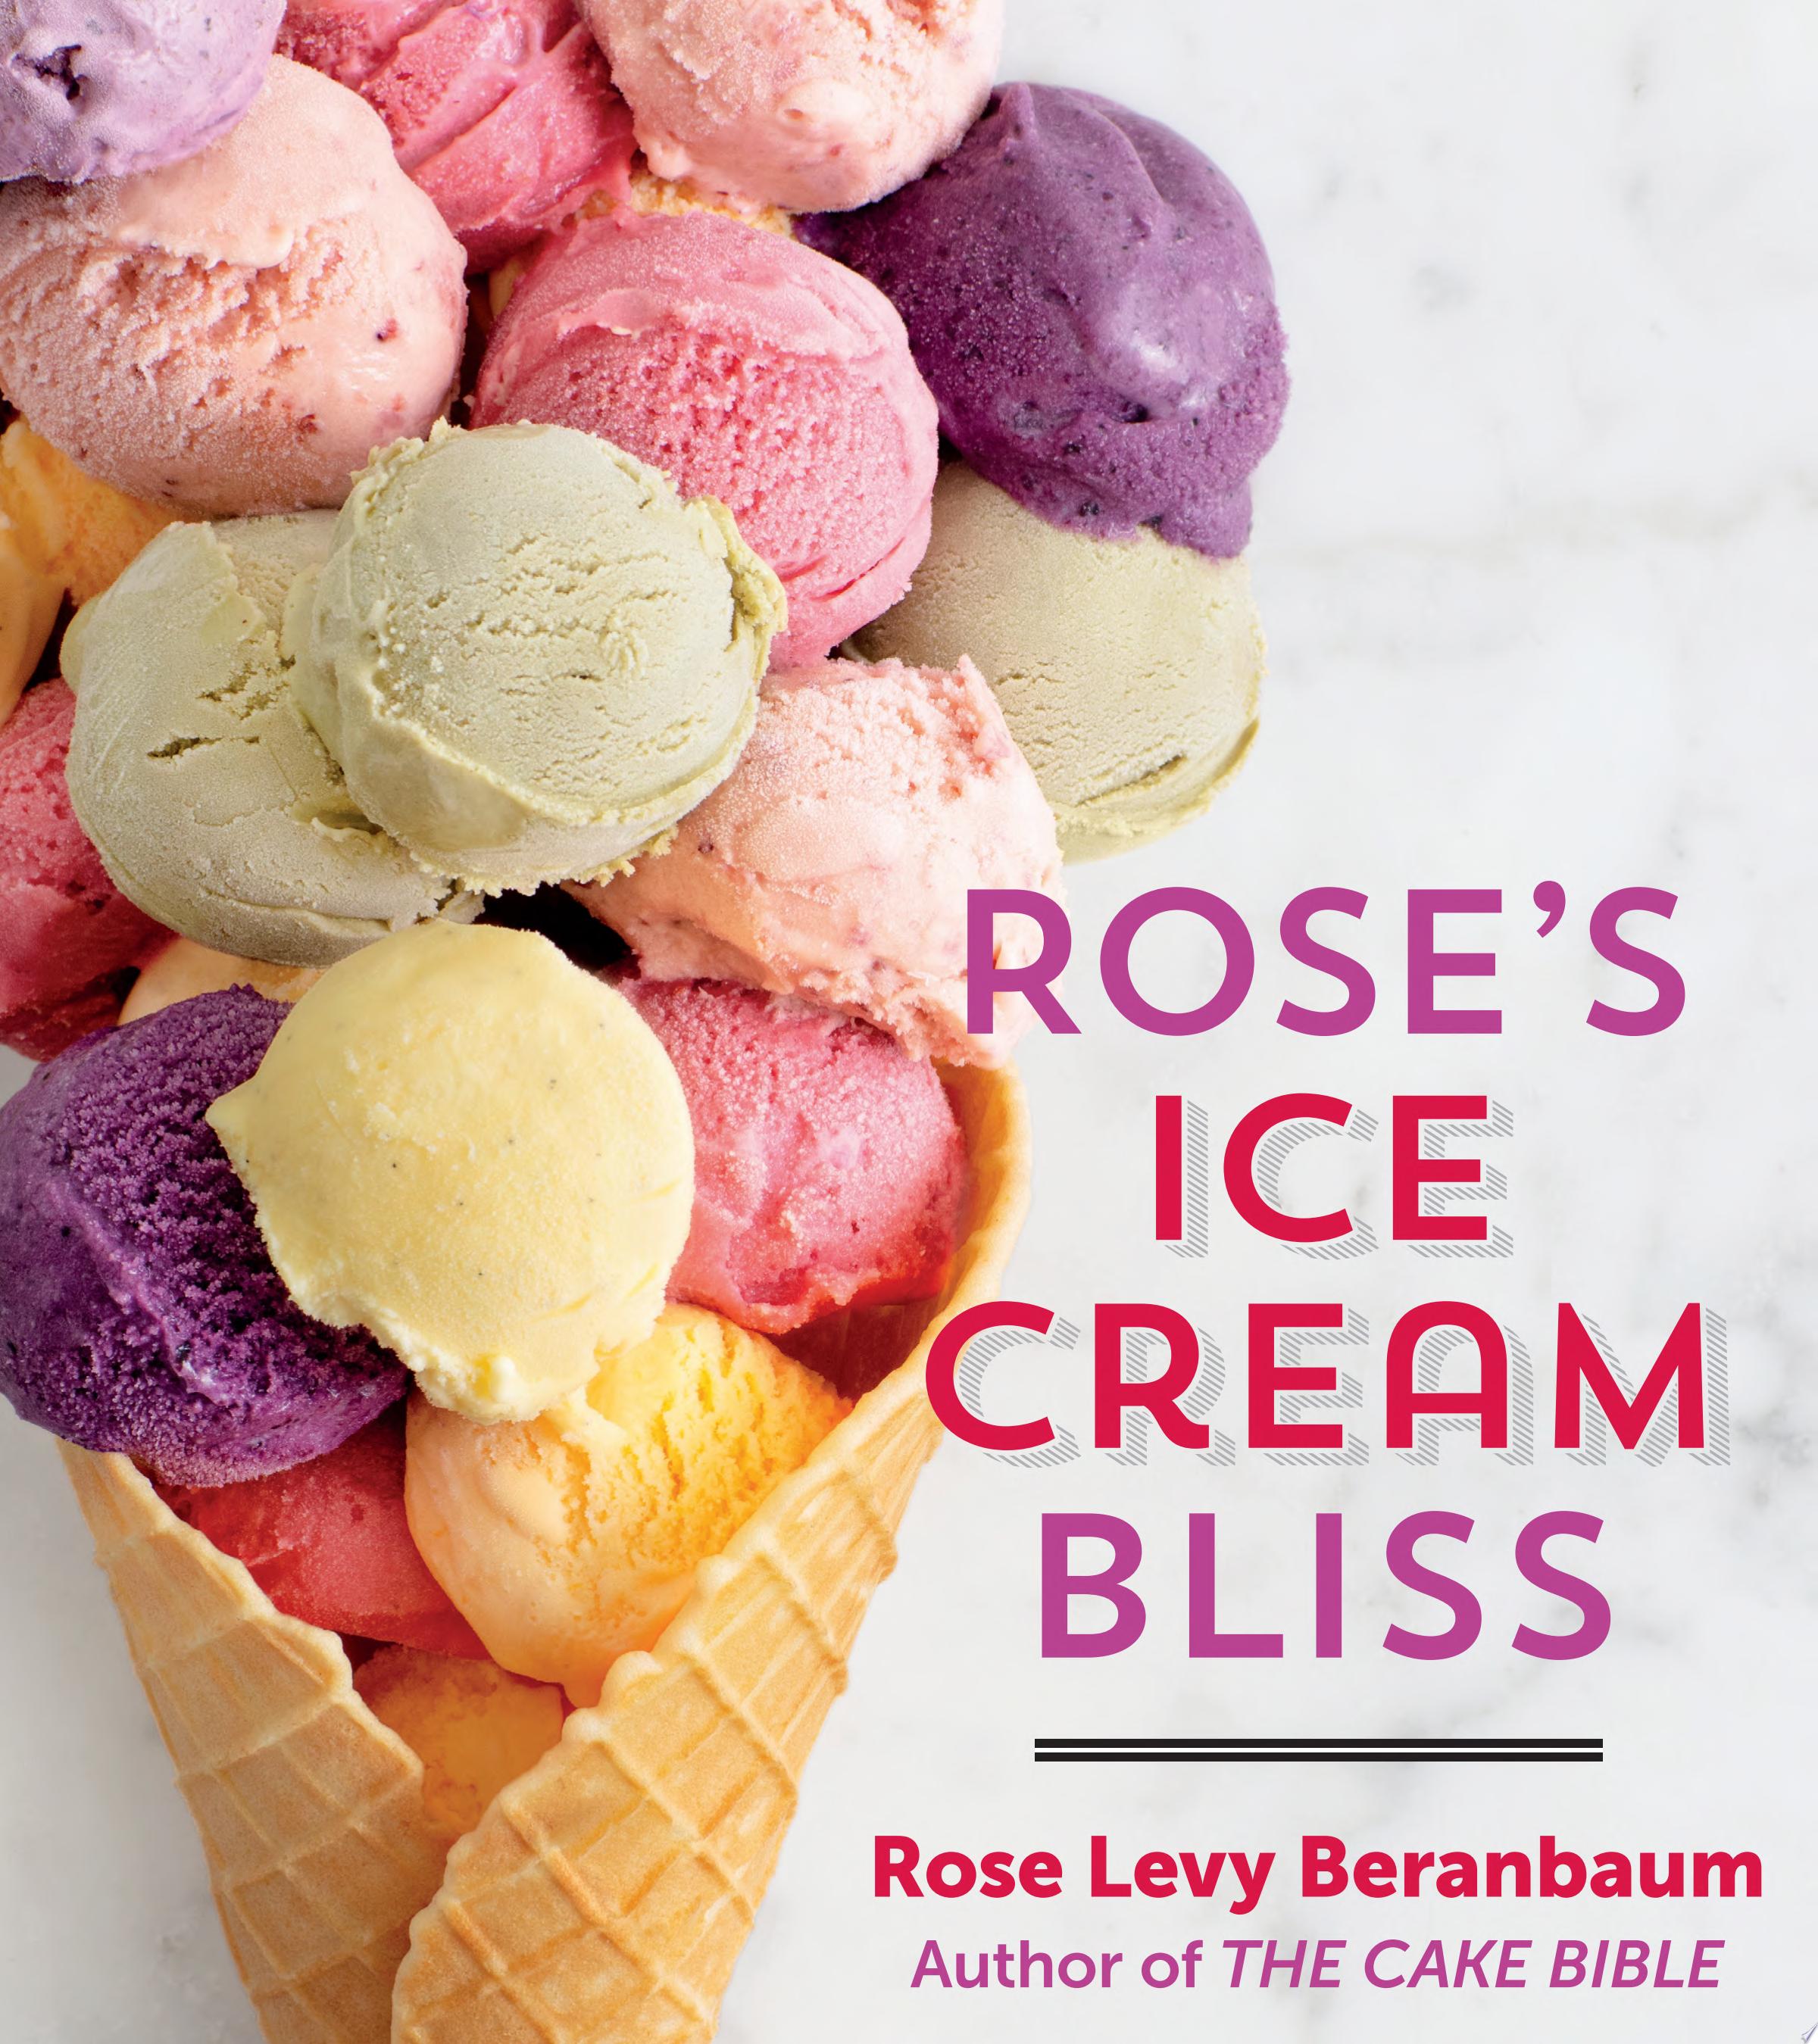 Image for "Rose&#039;s Ice Cream Bliss"